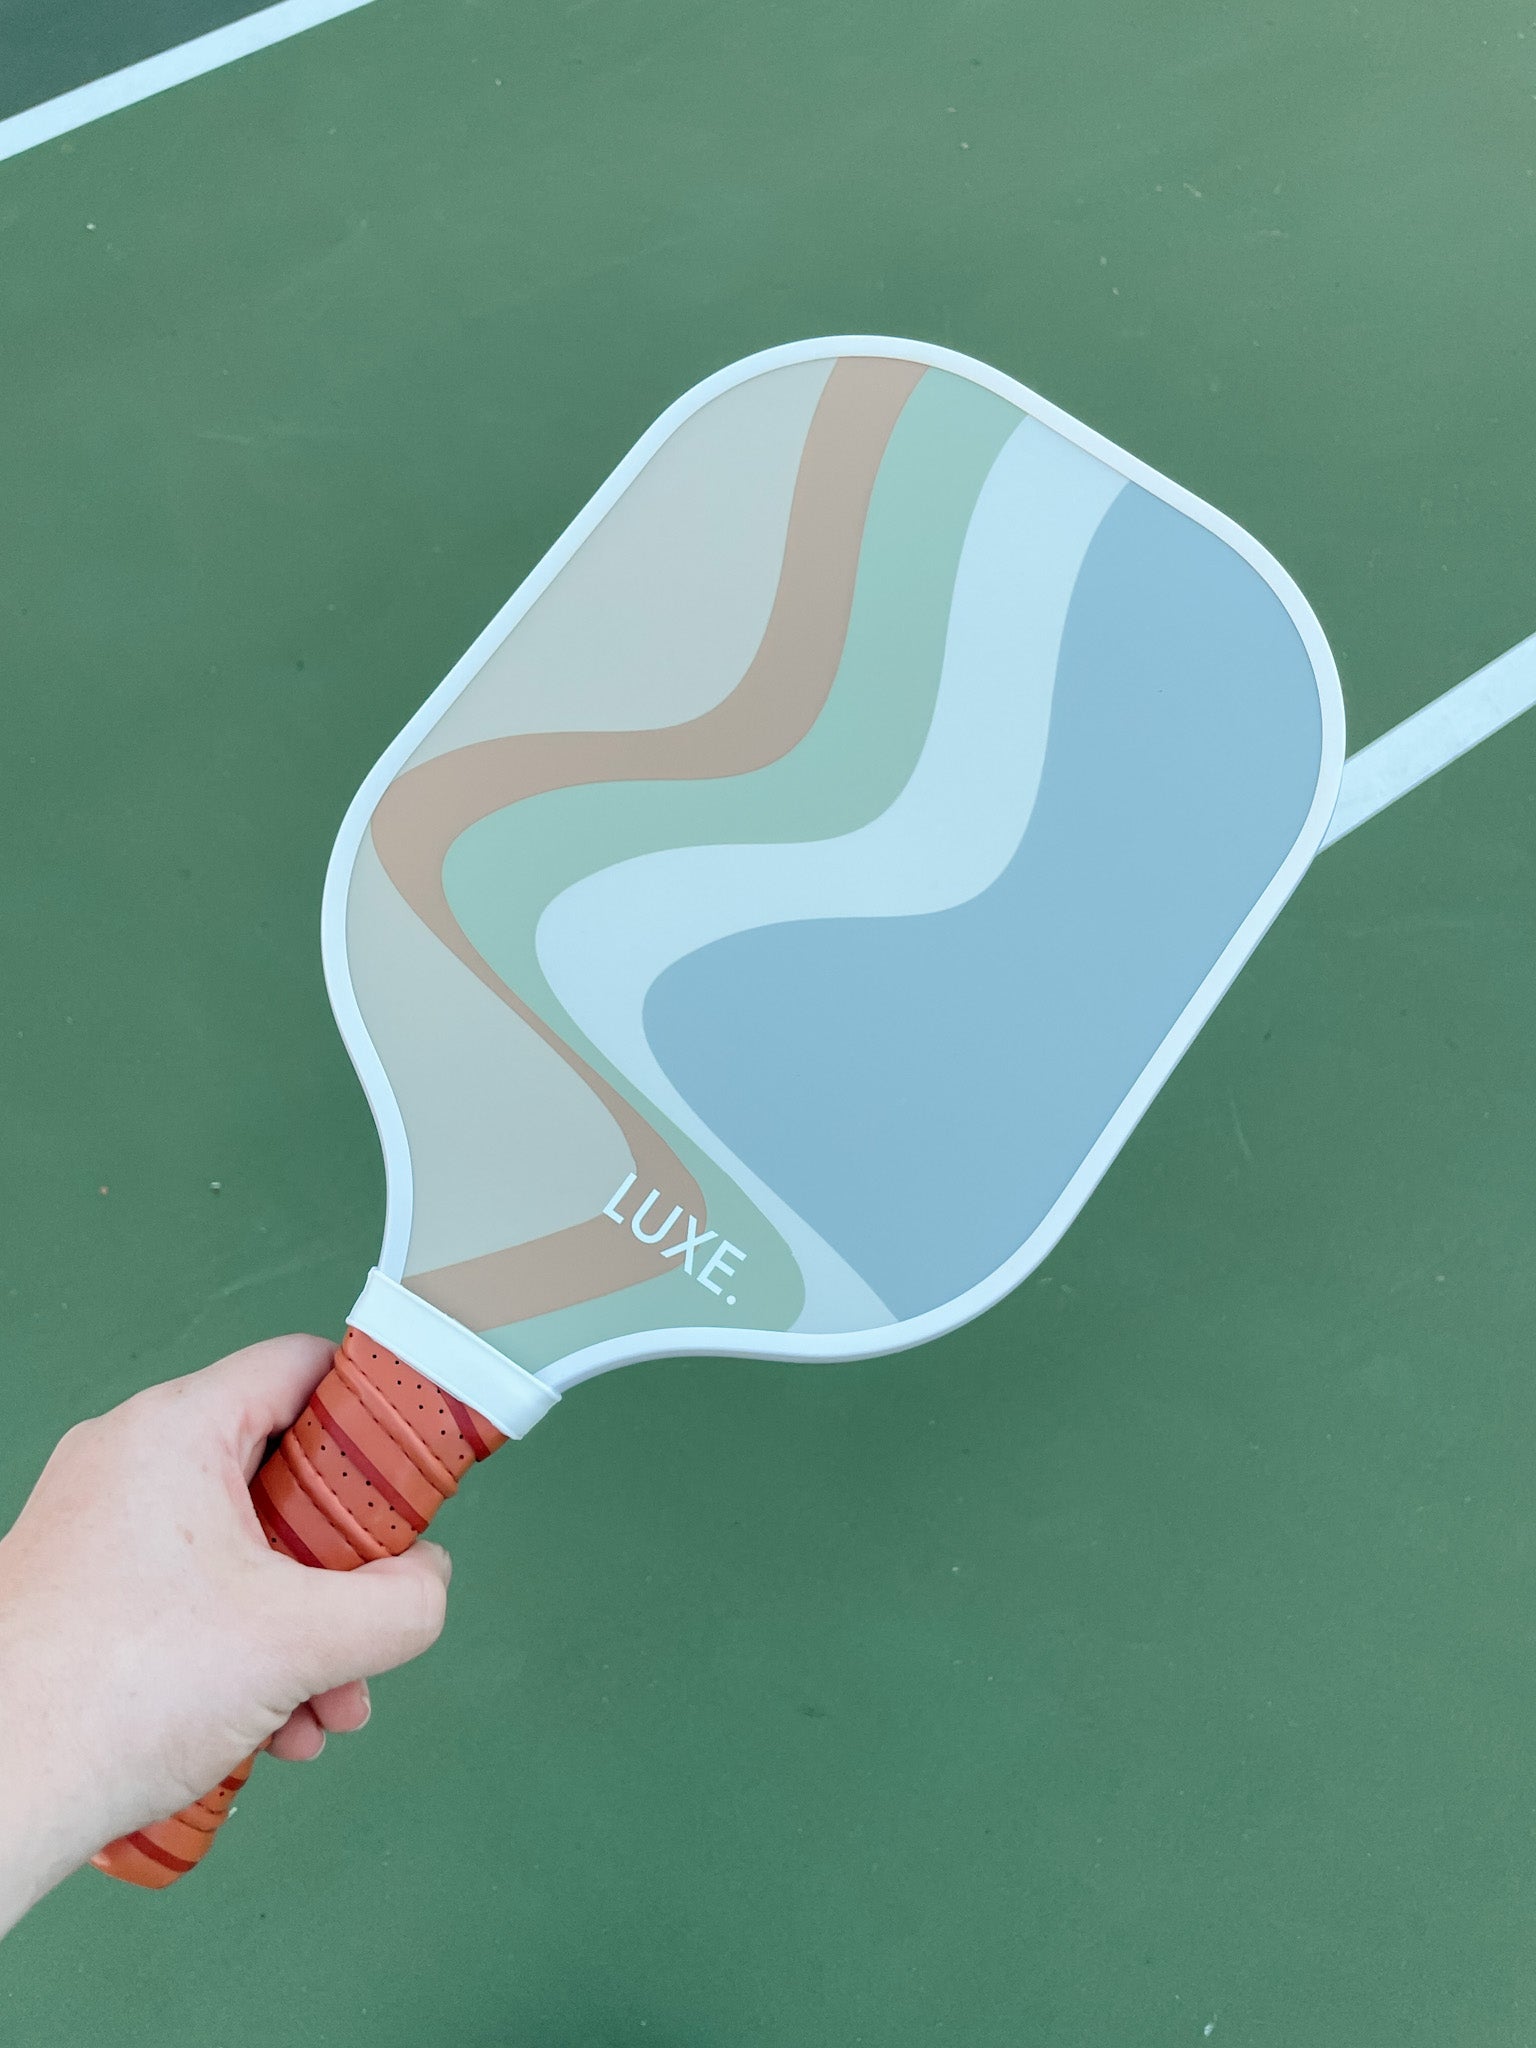 The Luka LUXE Pickleball Paddle. Cute and aesthetic pickleball paddles